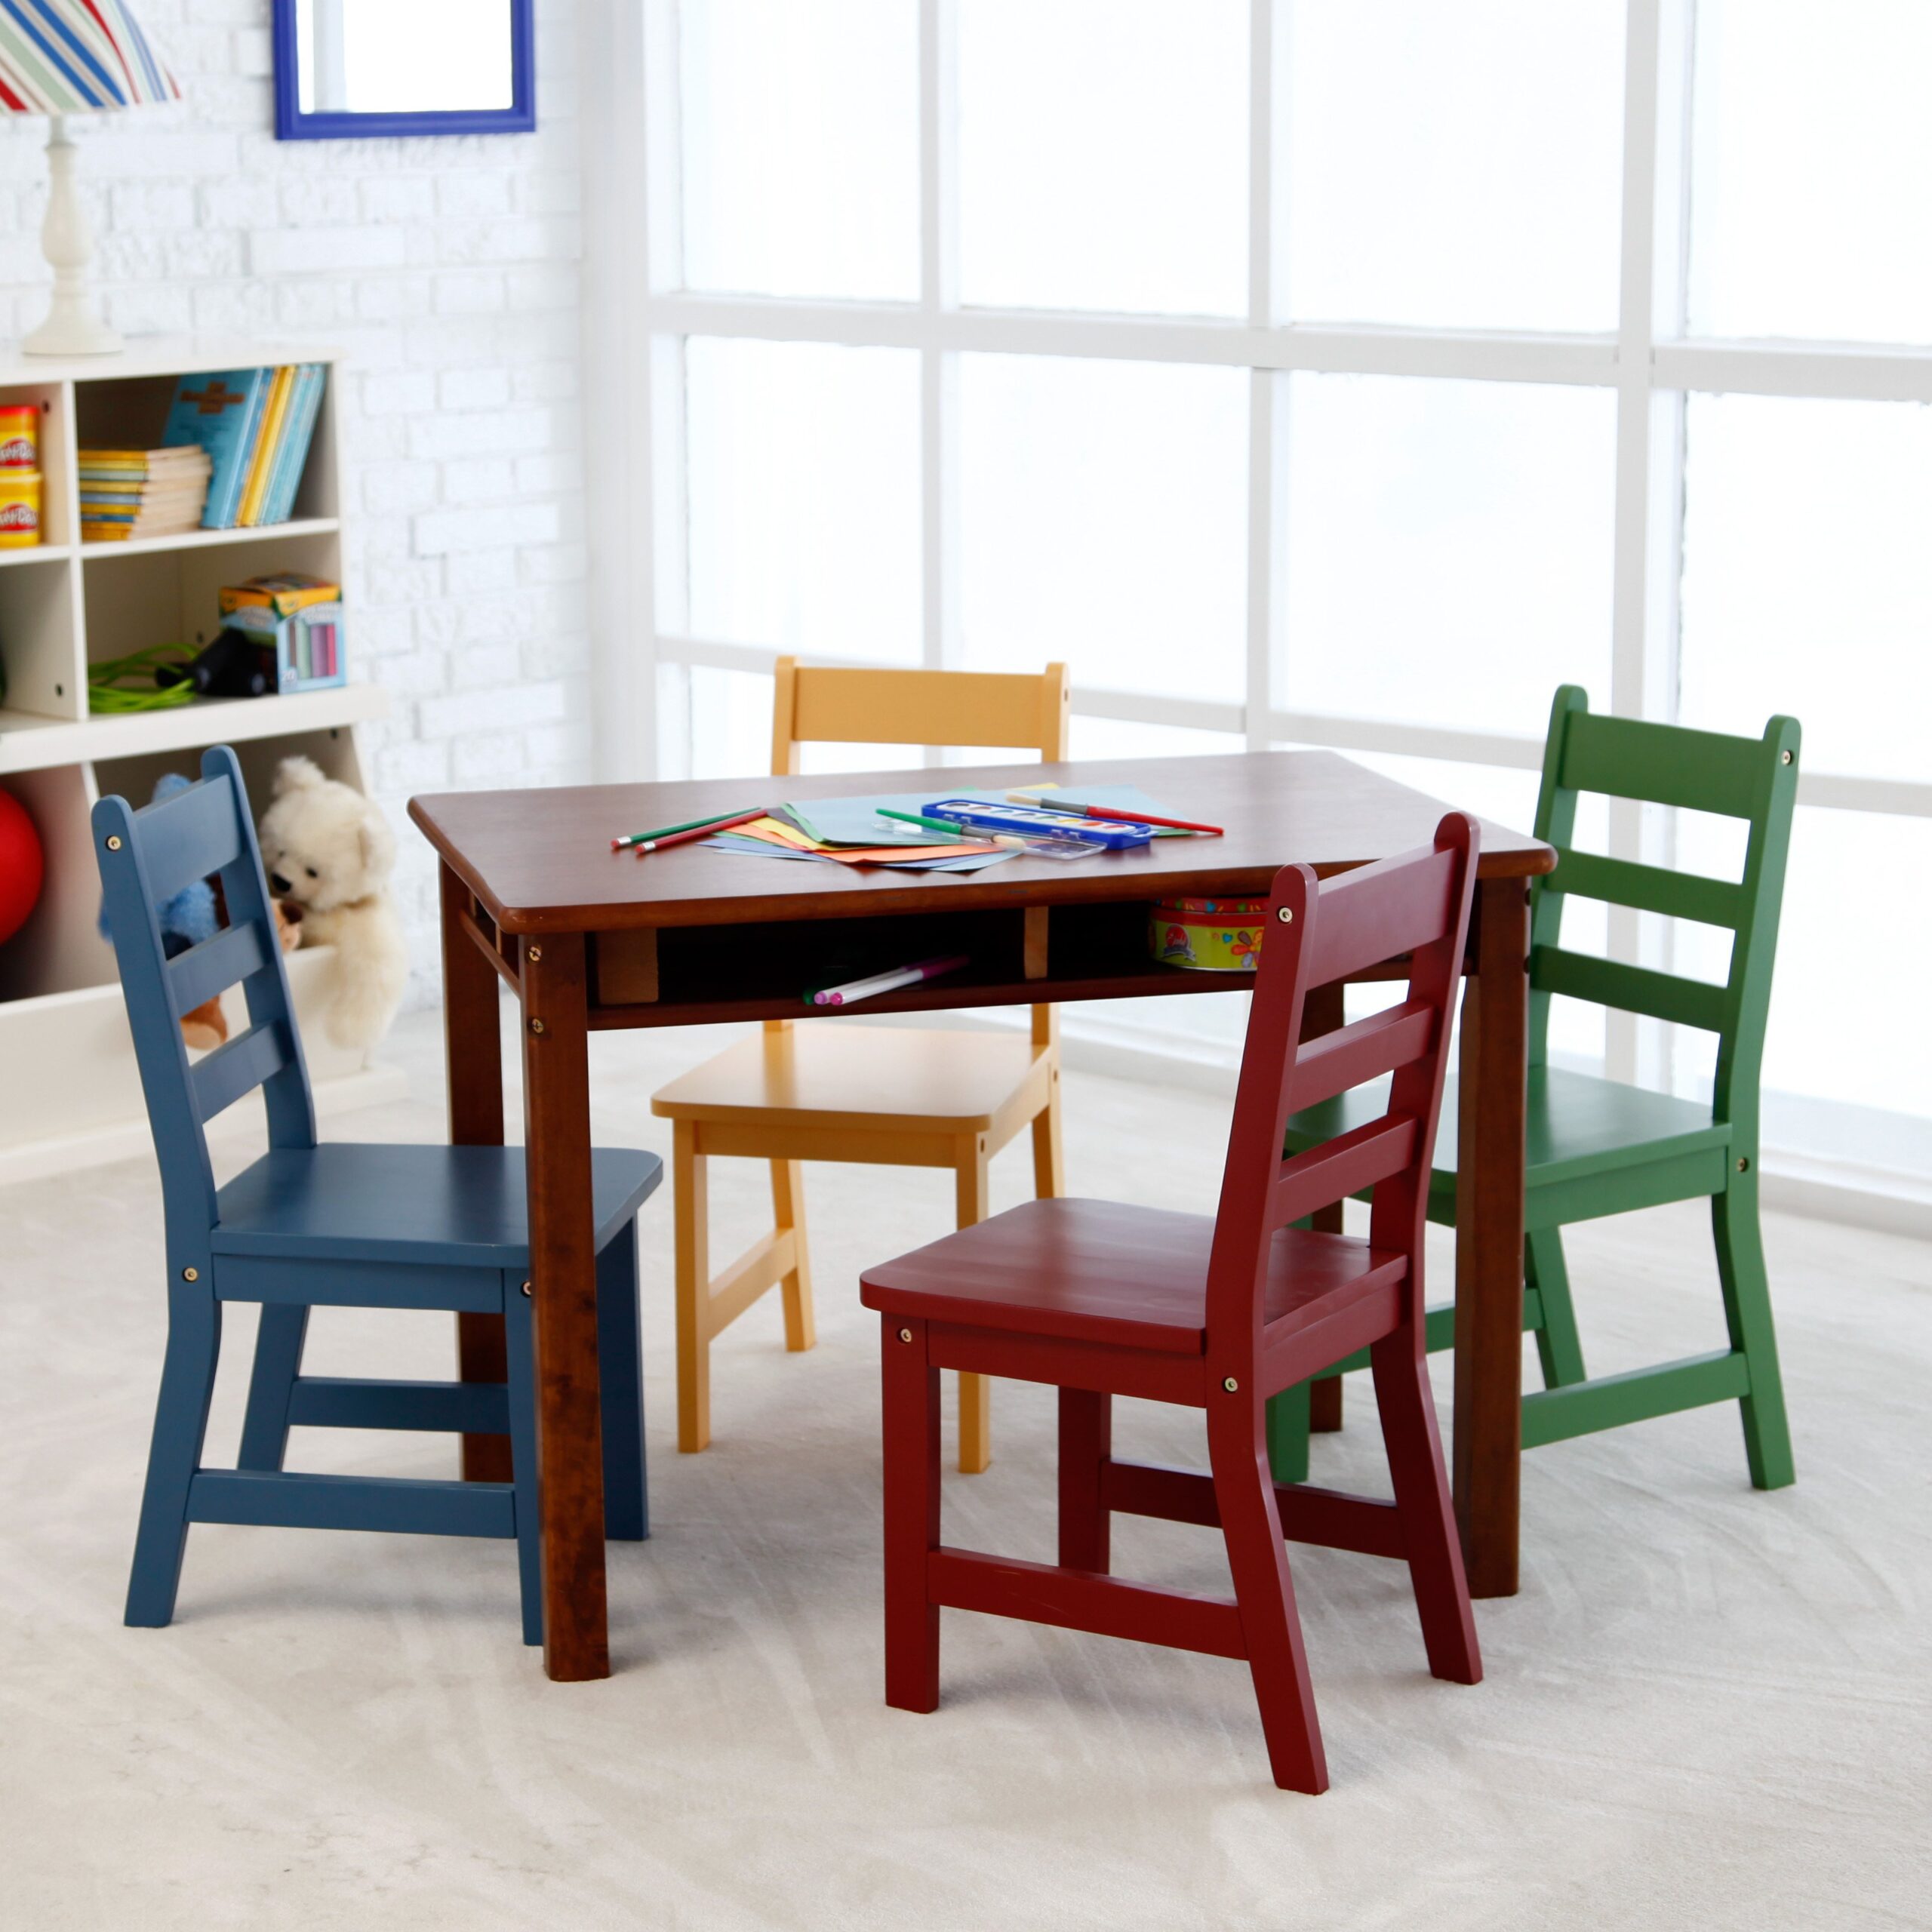 Kids table and chairs: ideal gift for
  your child